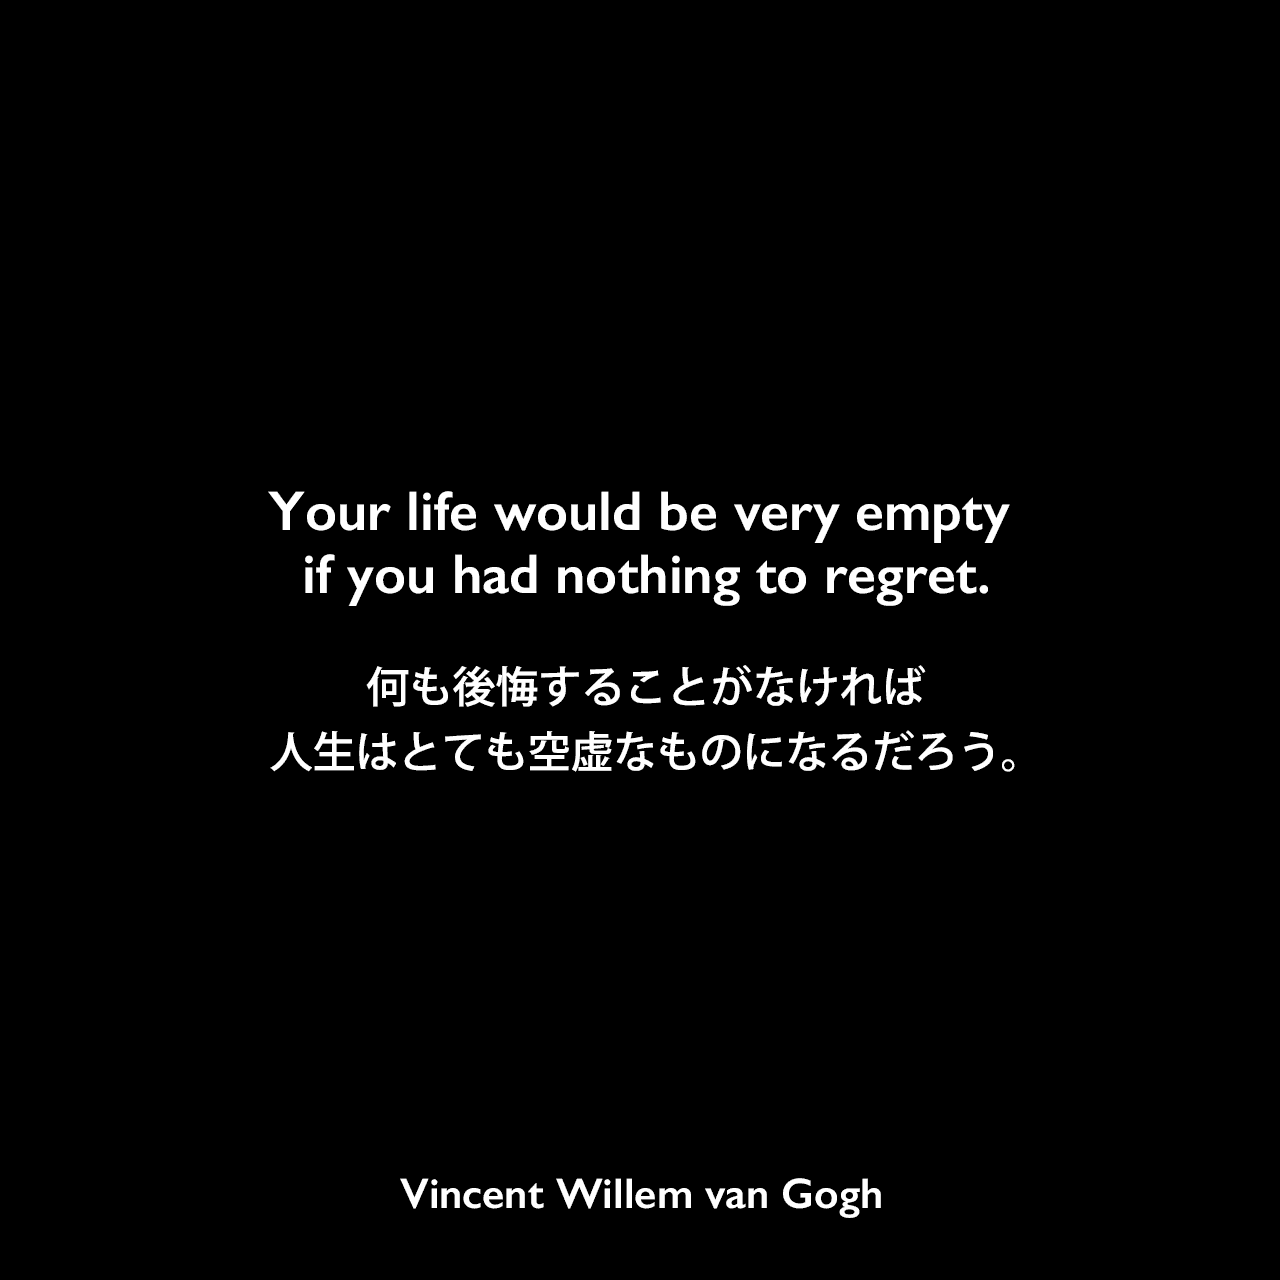 Your life would be very empty if you had nothing to regret.何も後悔することがなければ、人生はとても空虚なものになるだろう。Vincent Willem van Gogh